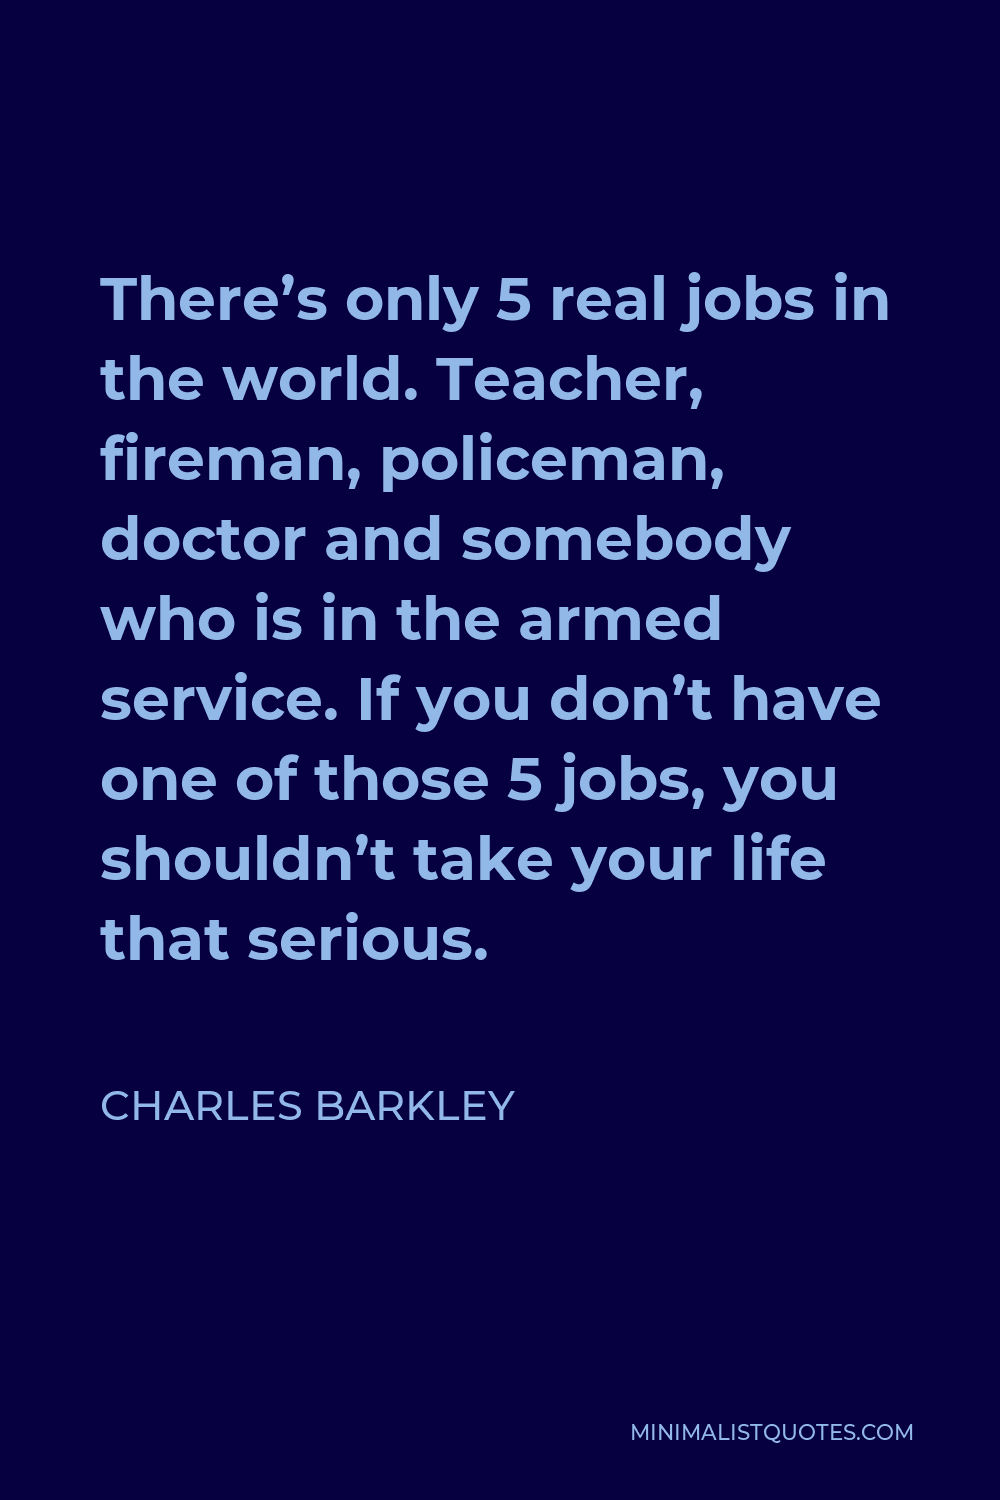 Charles Barkley Quote - There’s only 5 real jobs in the world. Teacher, fireman, policeman, doctor and somebody who is in the armed service. If you don’t have one of those 5 jobs, you shouldn’t take your life that serious.